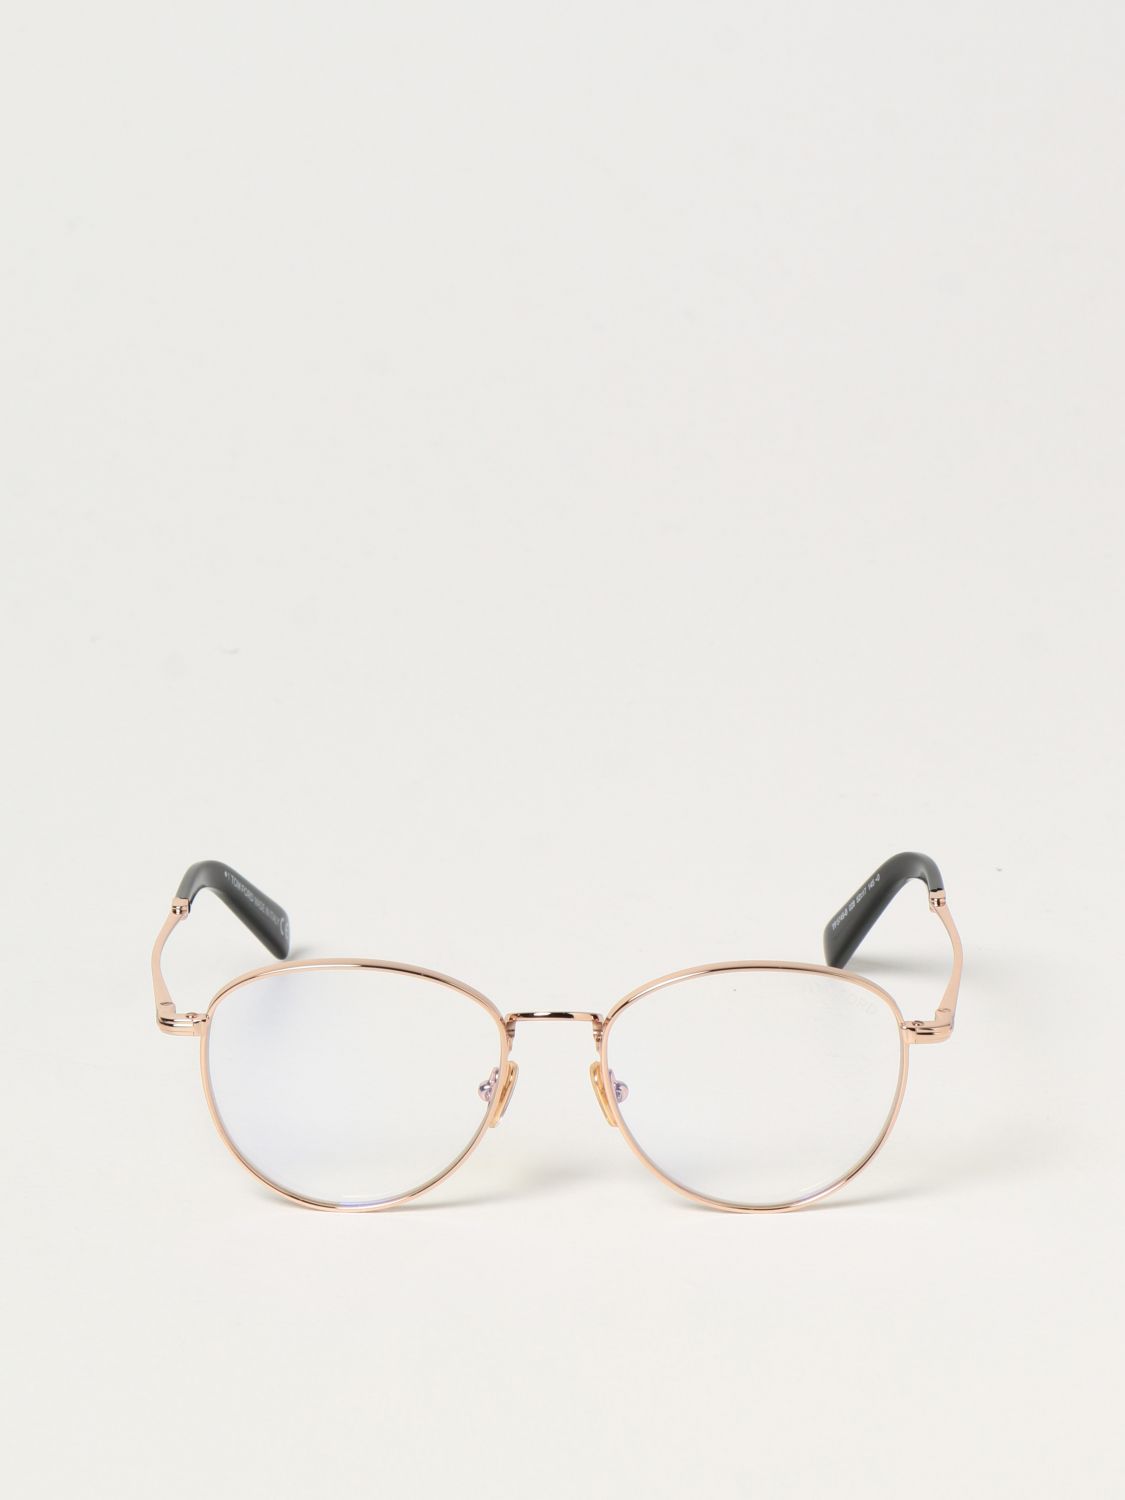 Lunettes Tom Ford: Lunettes homme Tom Ford or 2